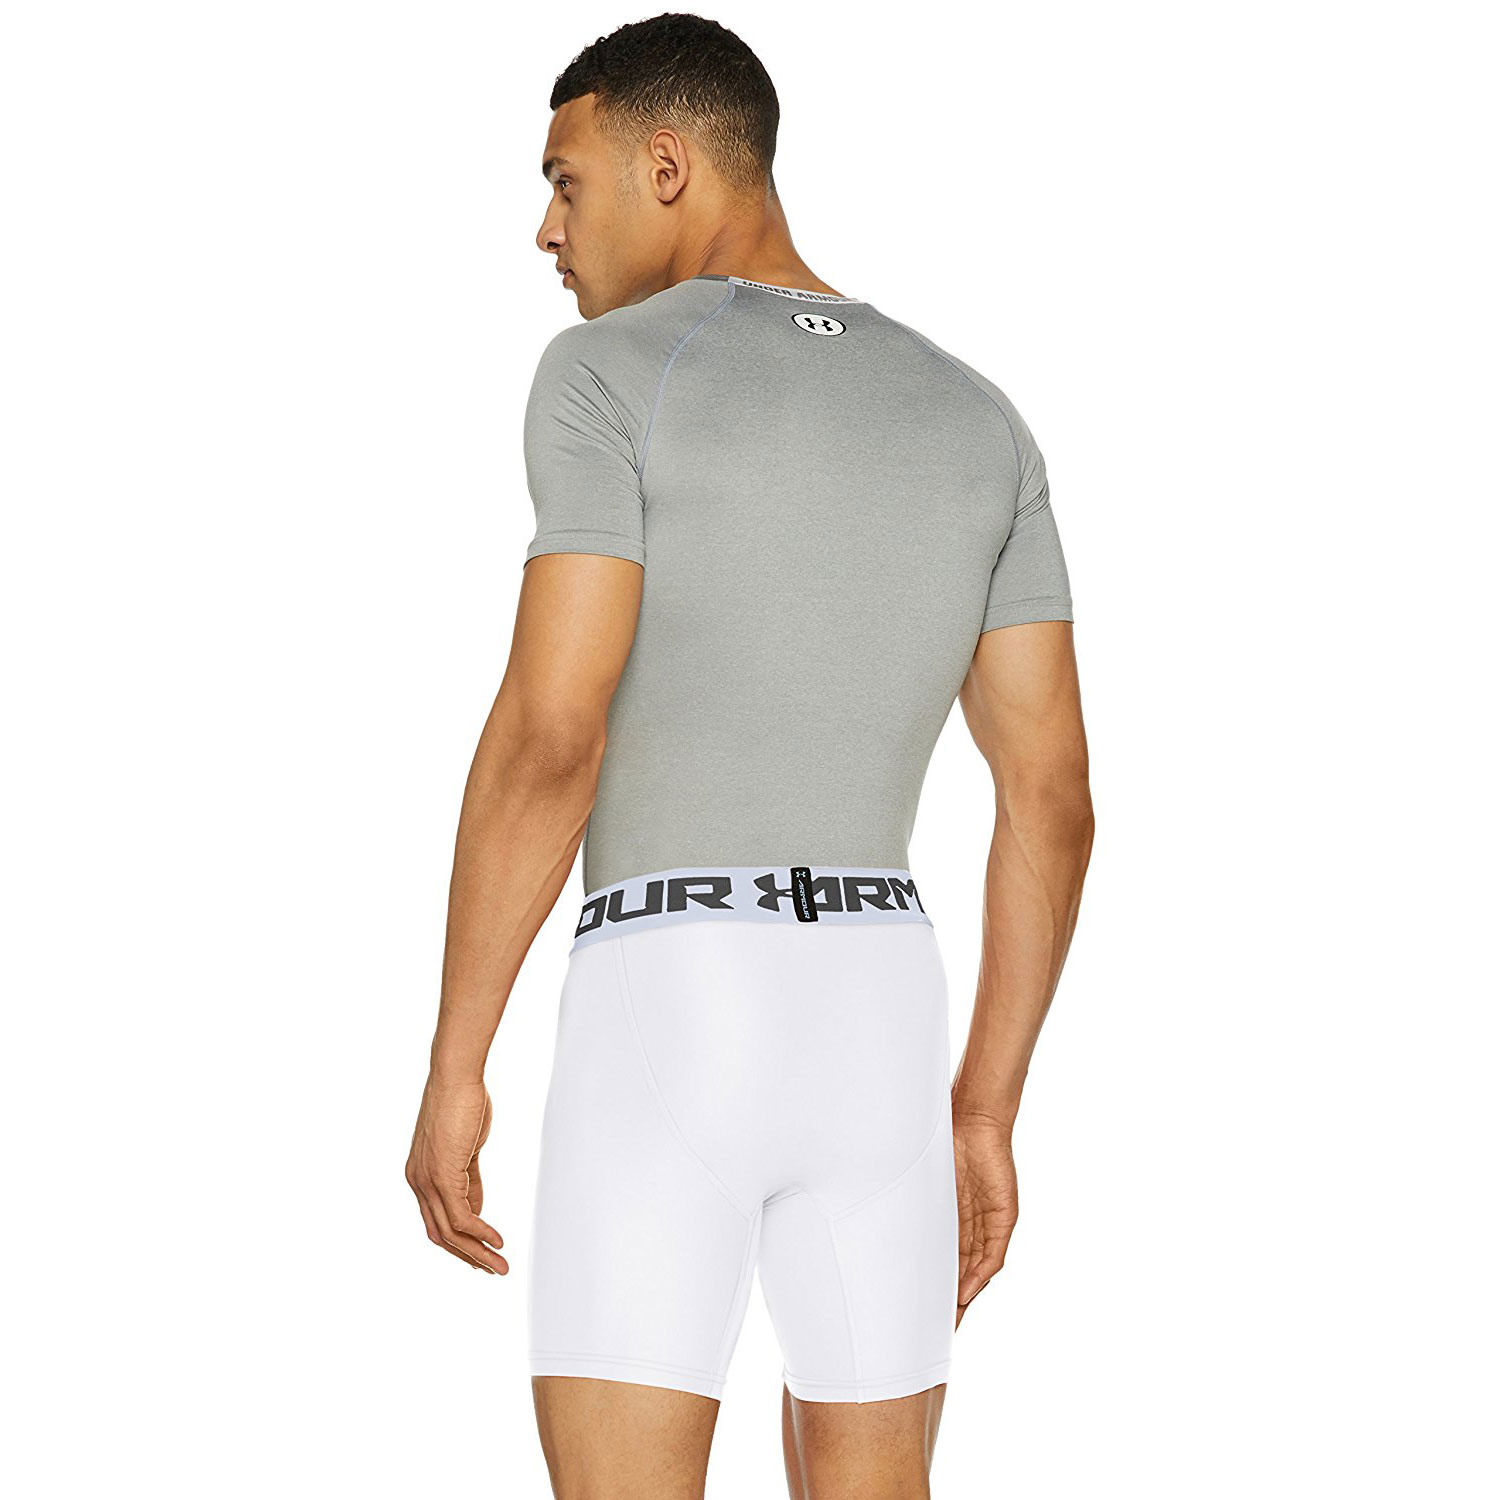  Under Armour Heat Gear Armour 2.0 Compressed Men's Shorts